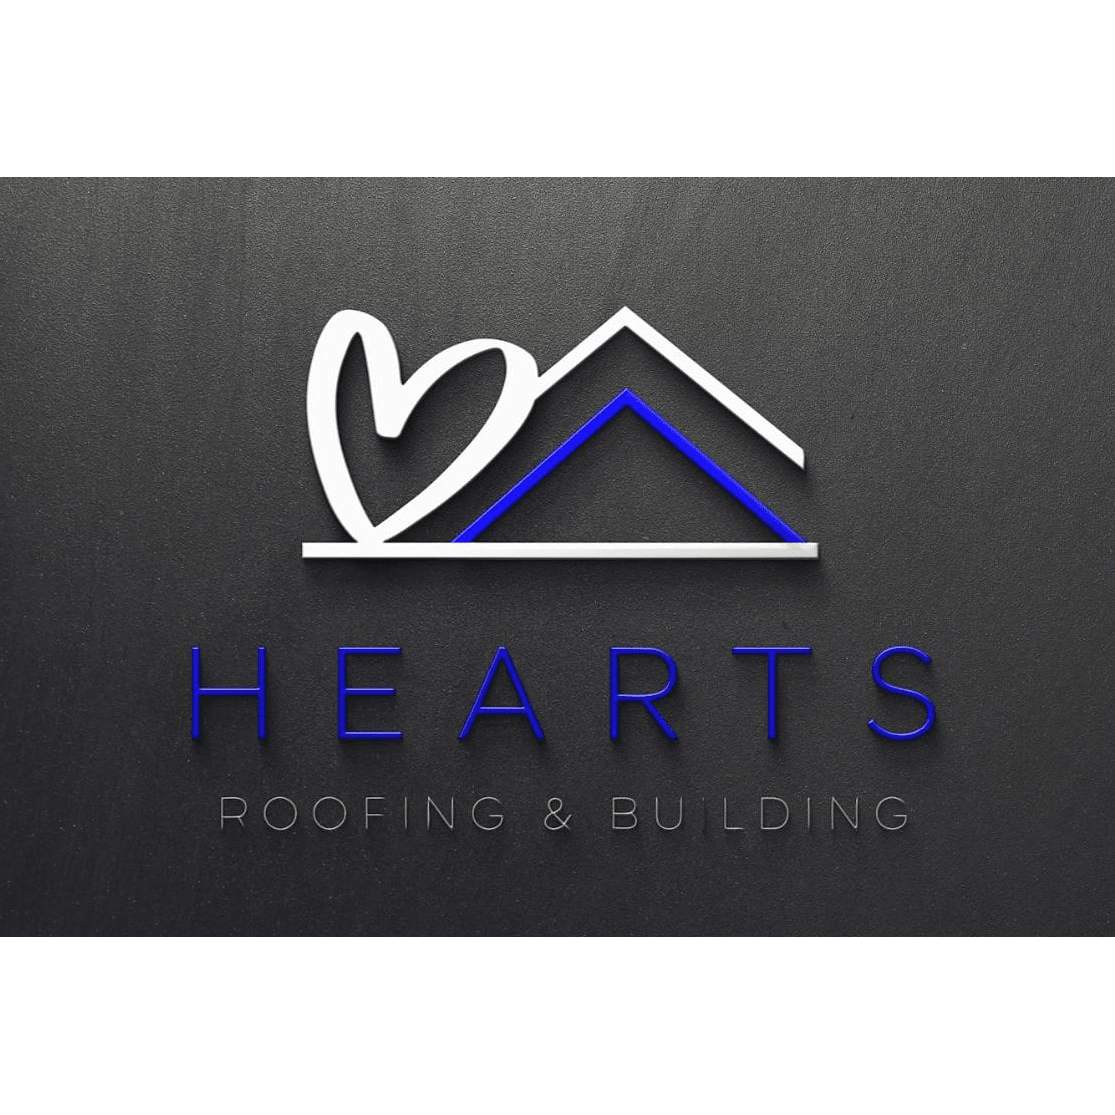 Hearts Roofing and Building Ltd - Kington, Herefordshire - 07713 773136 | ShowMeLocal.com